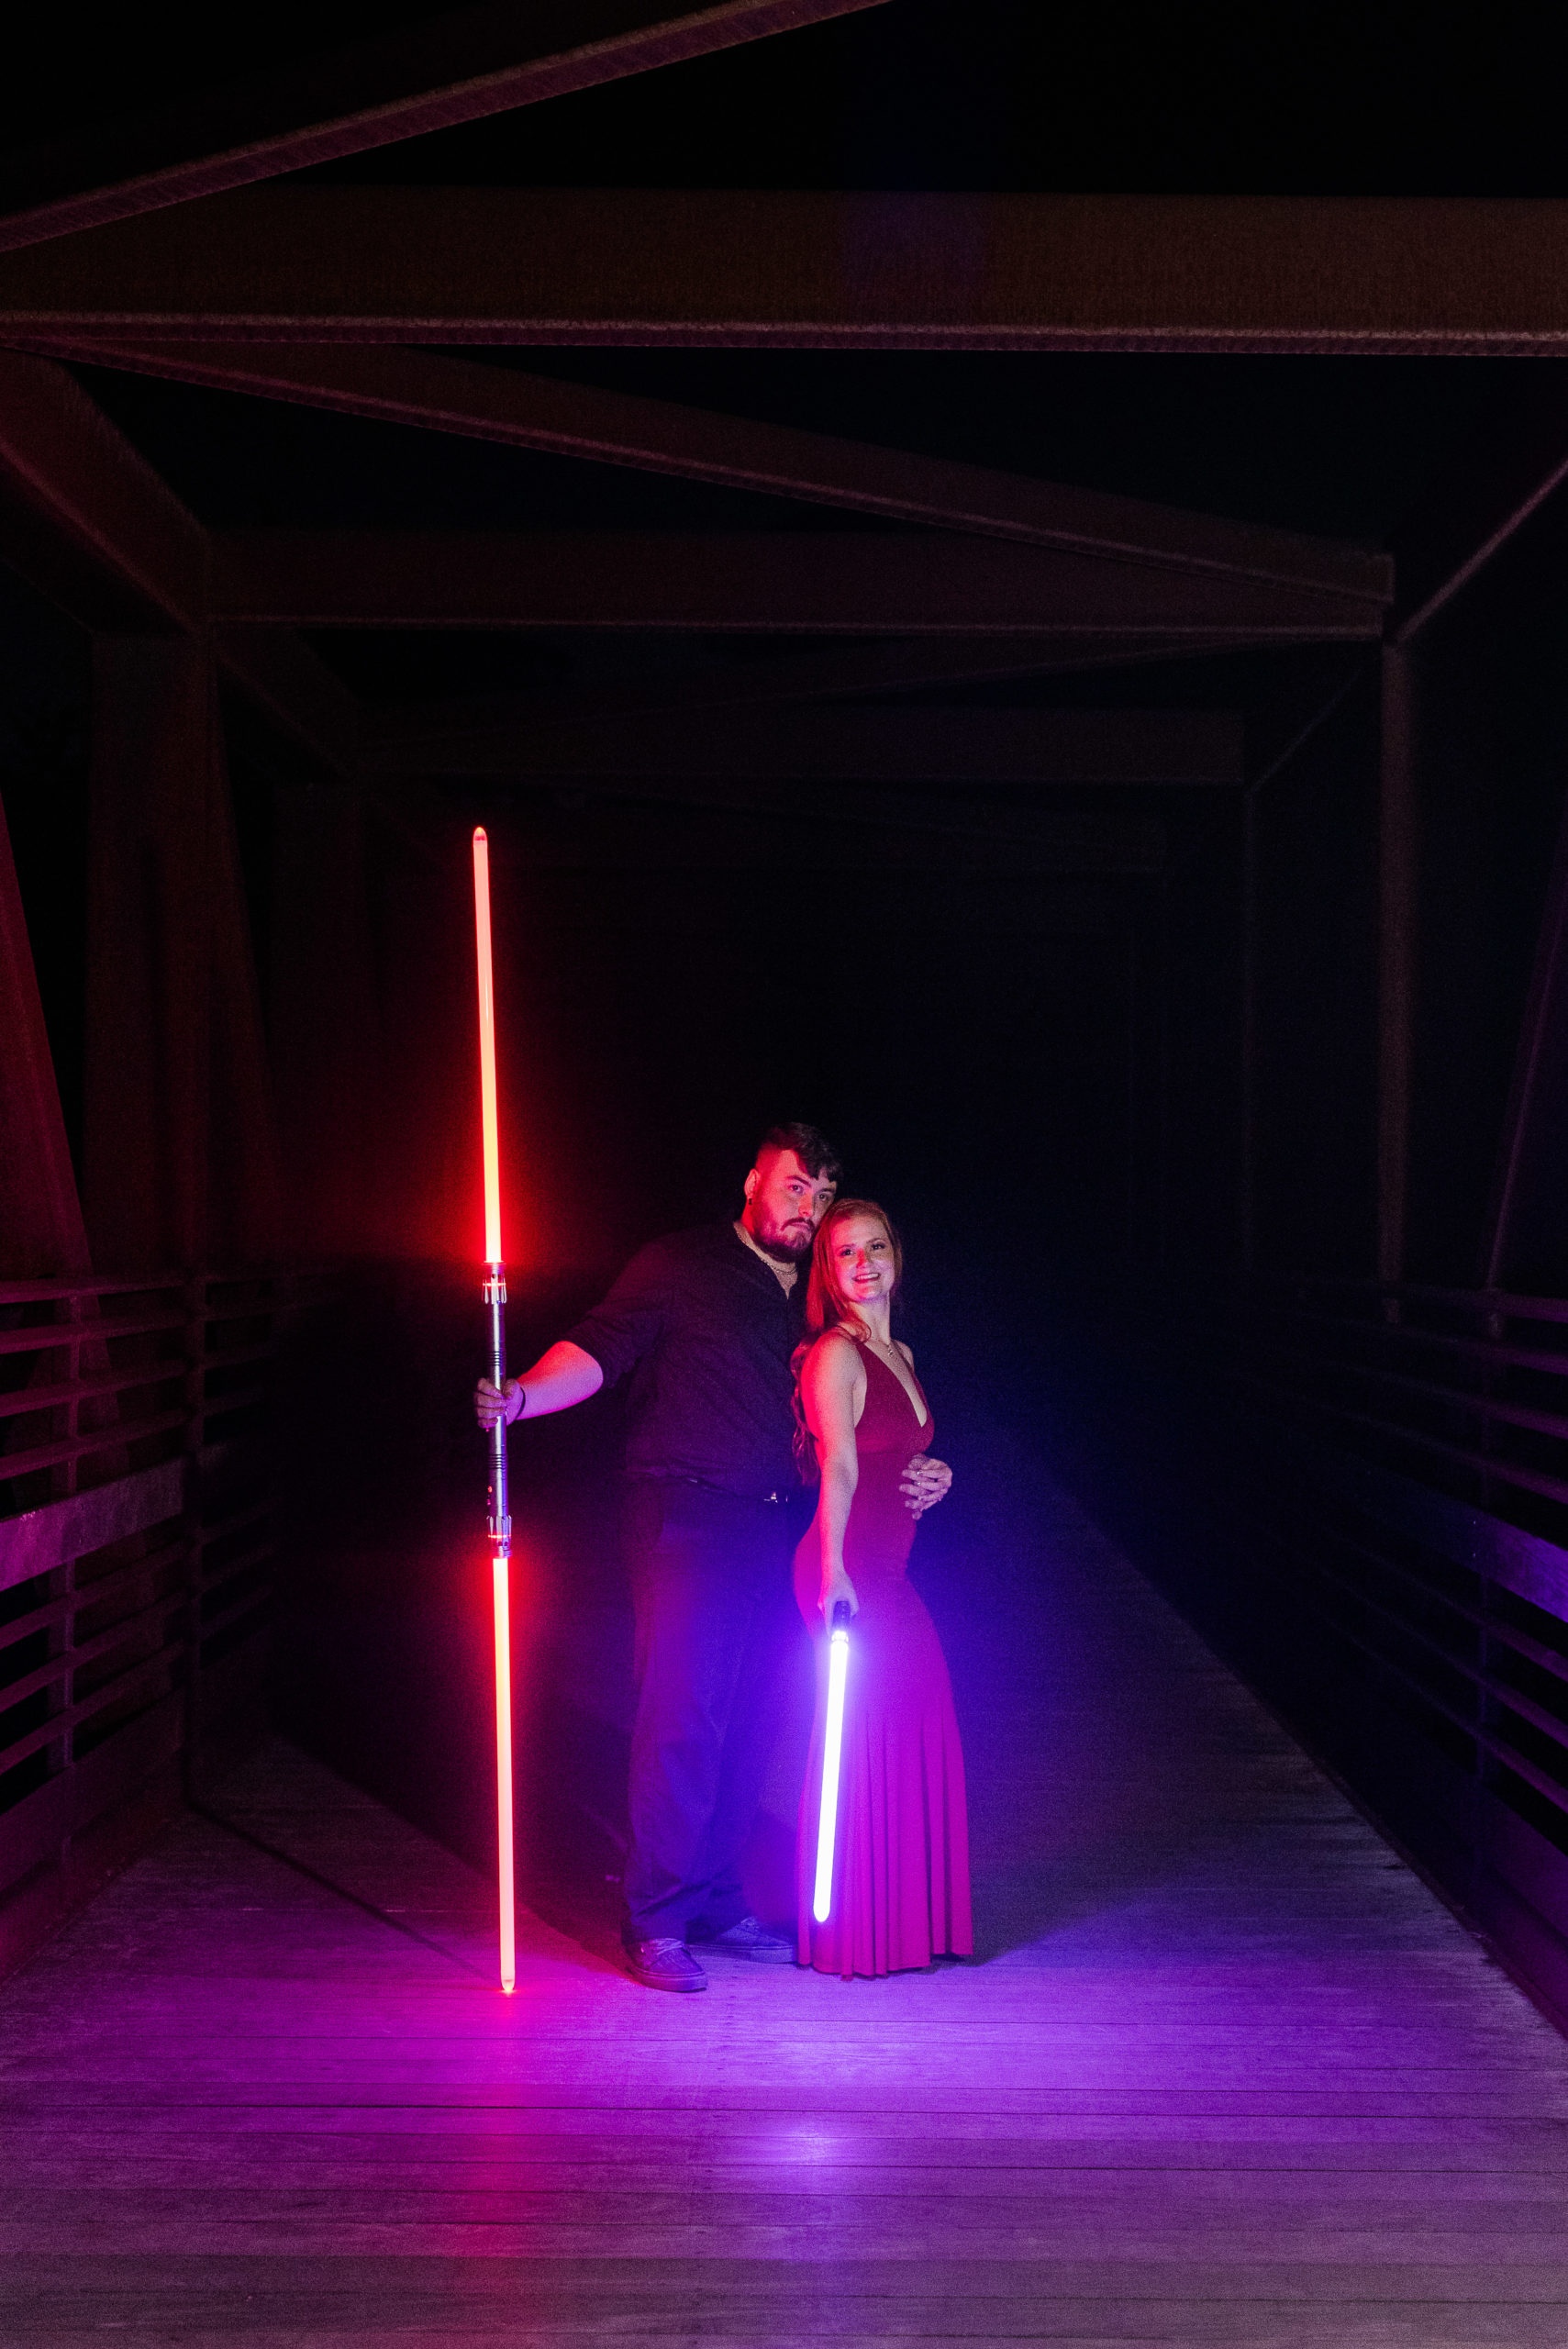 Wendi and Sage's Engagement Session with lightsabers